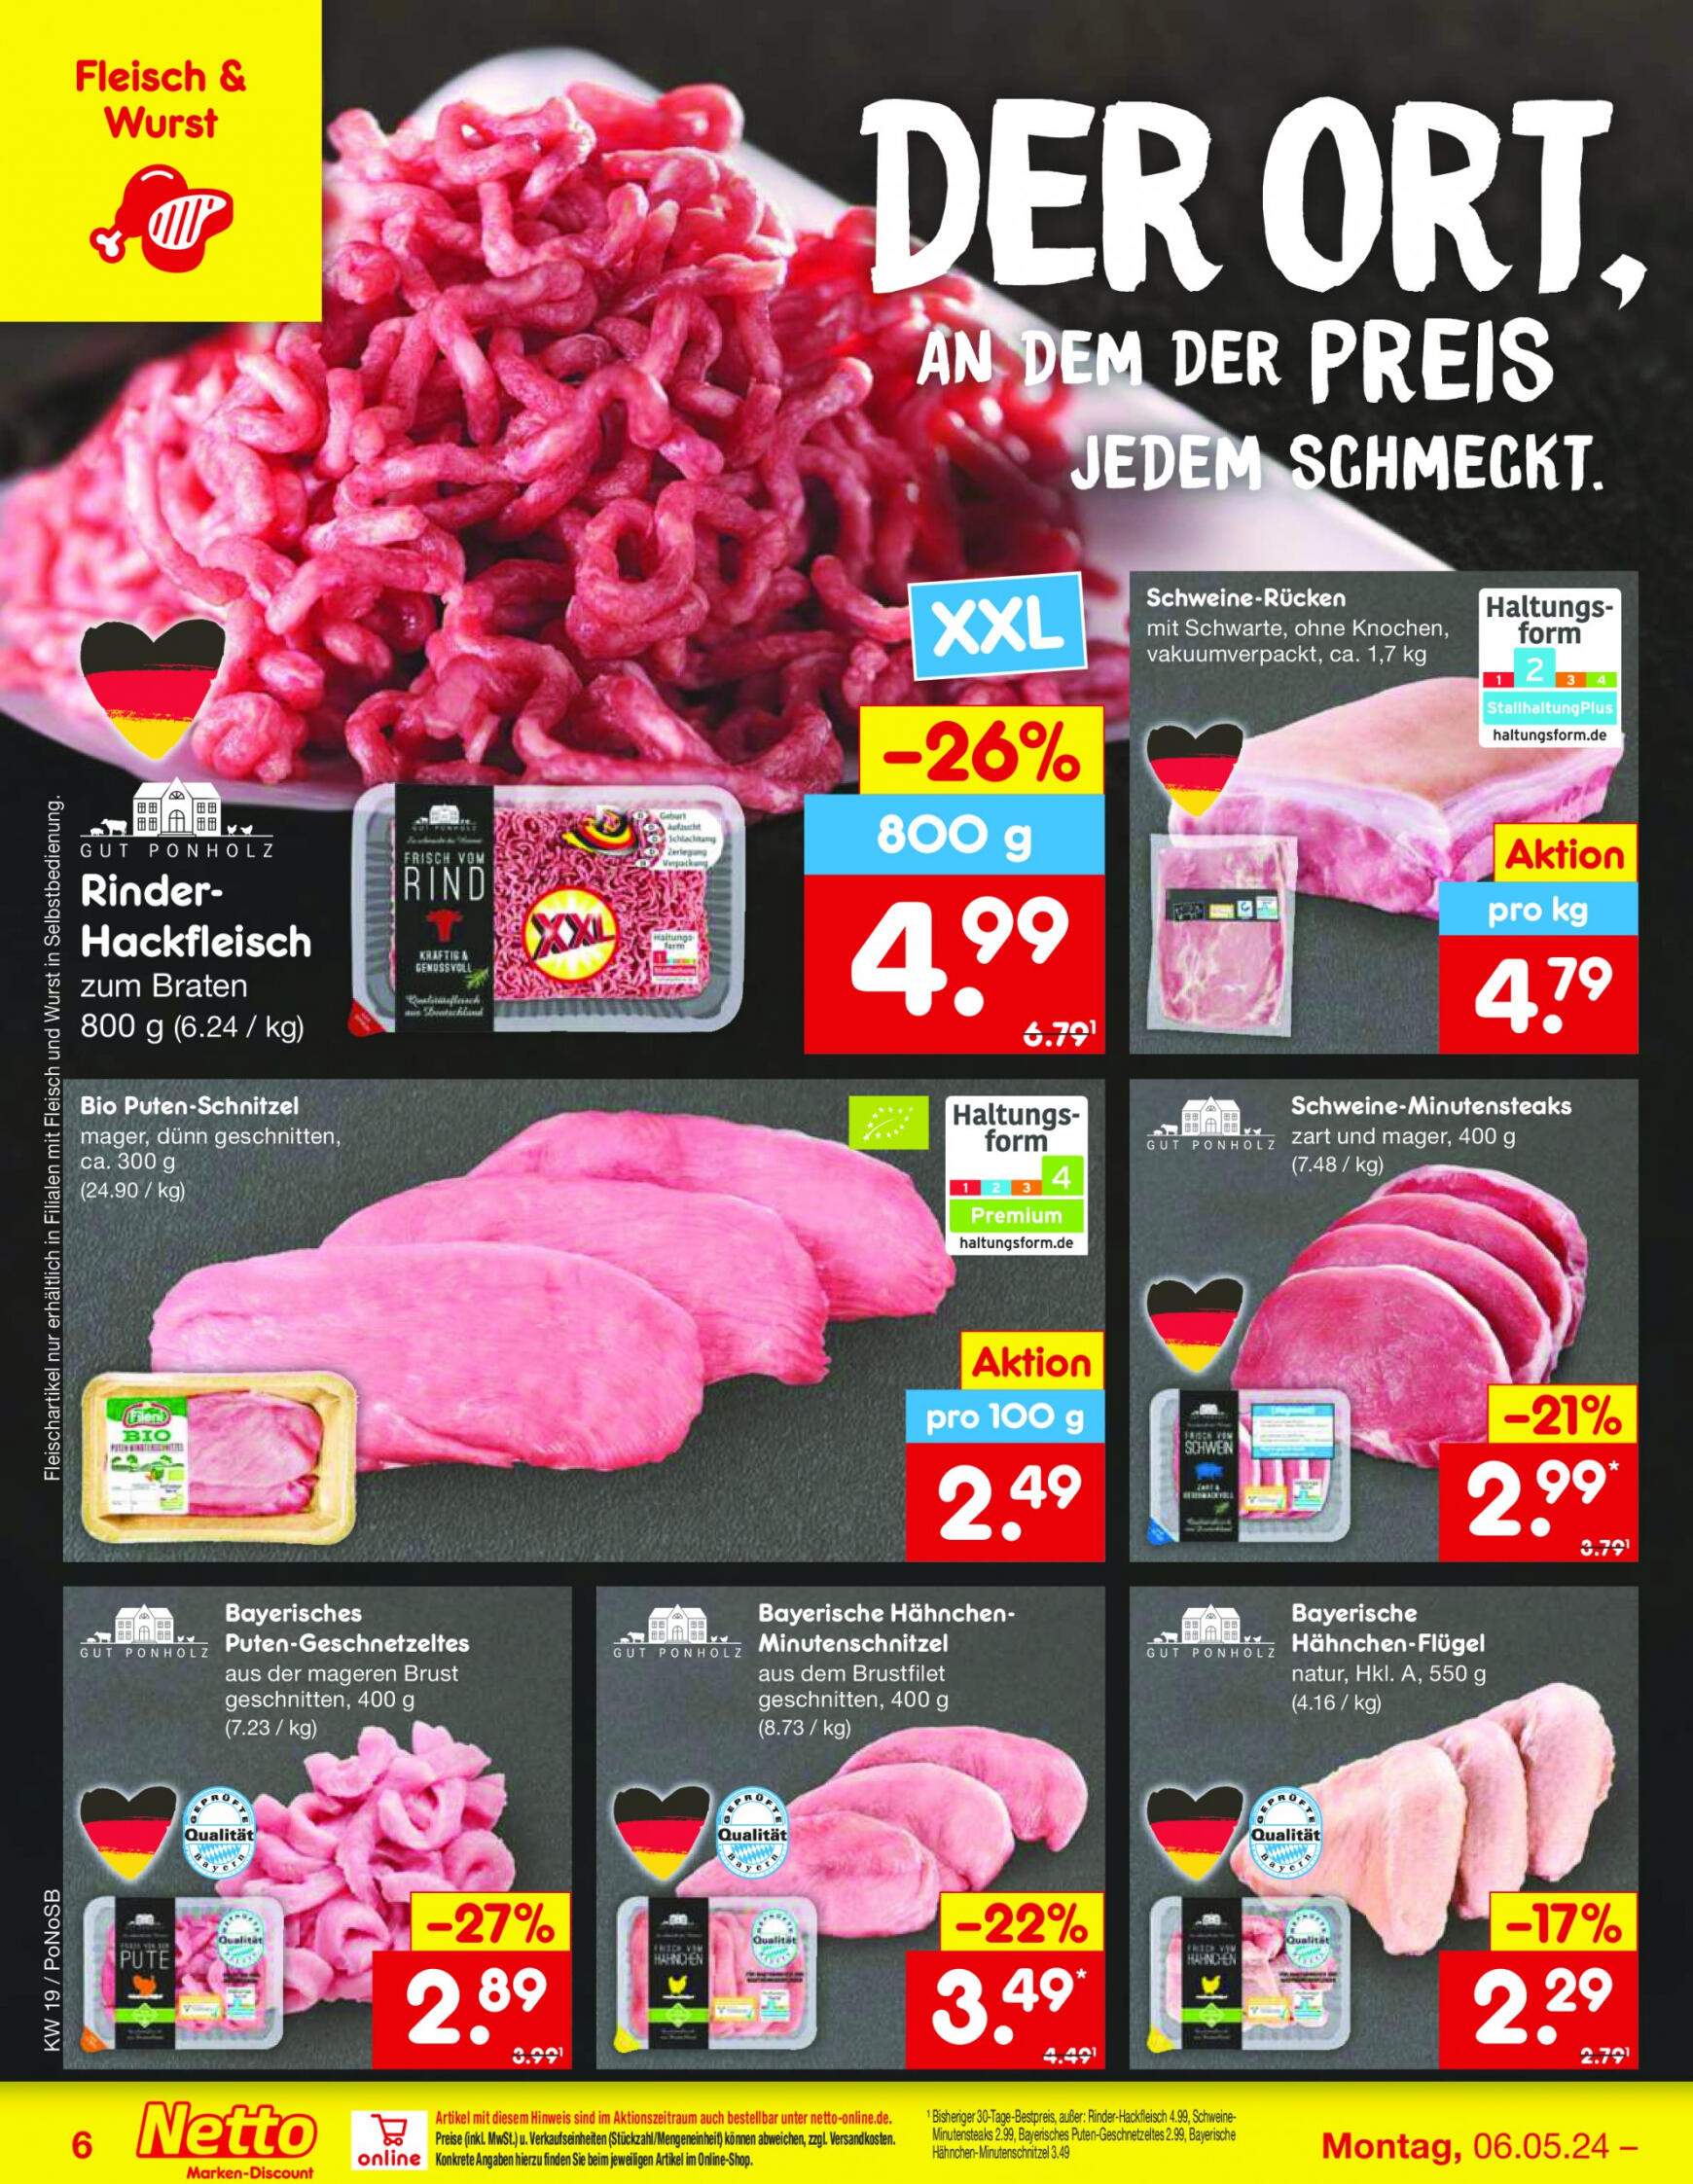 netto - Flyer Netto aktuell 06.05. - 11.05. - page: 6